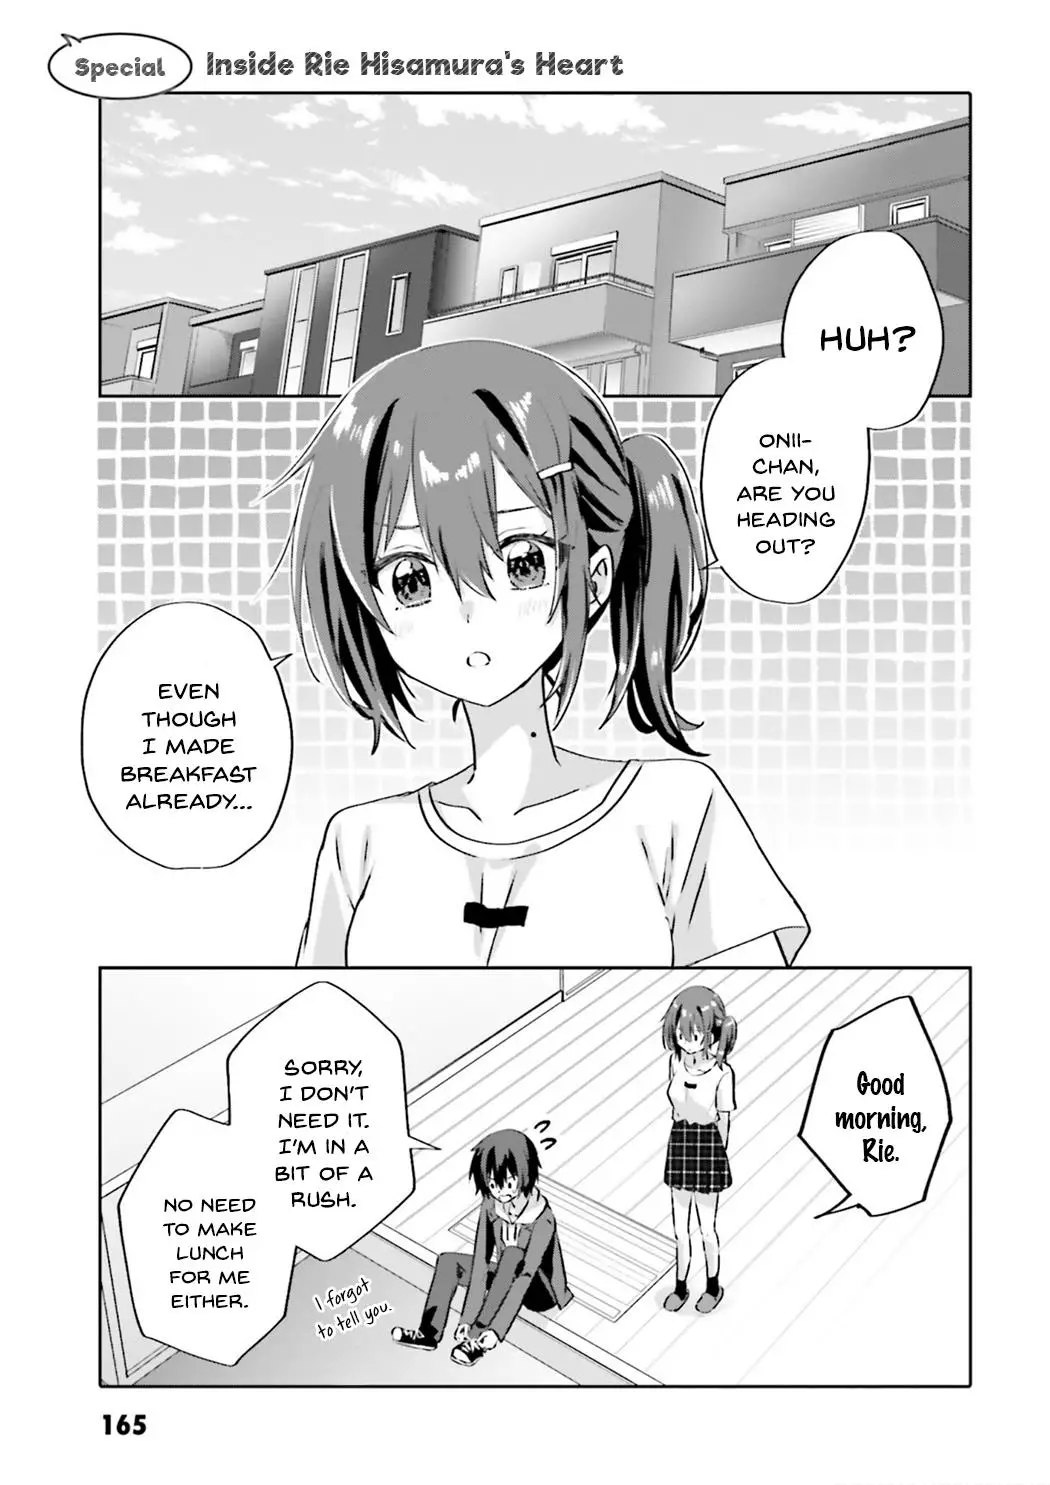 Since I’Ve Entered The World Of Romantic Comedy Manga, I’Ll Do My Best To Make The Losing Heroine Happy - 6.5 page 1-619e1089